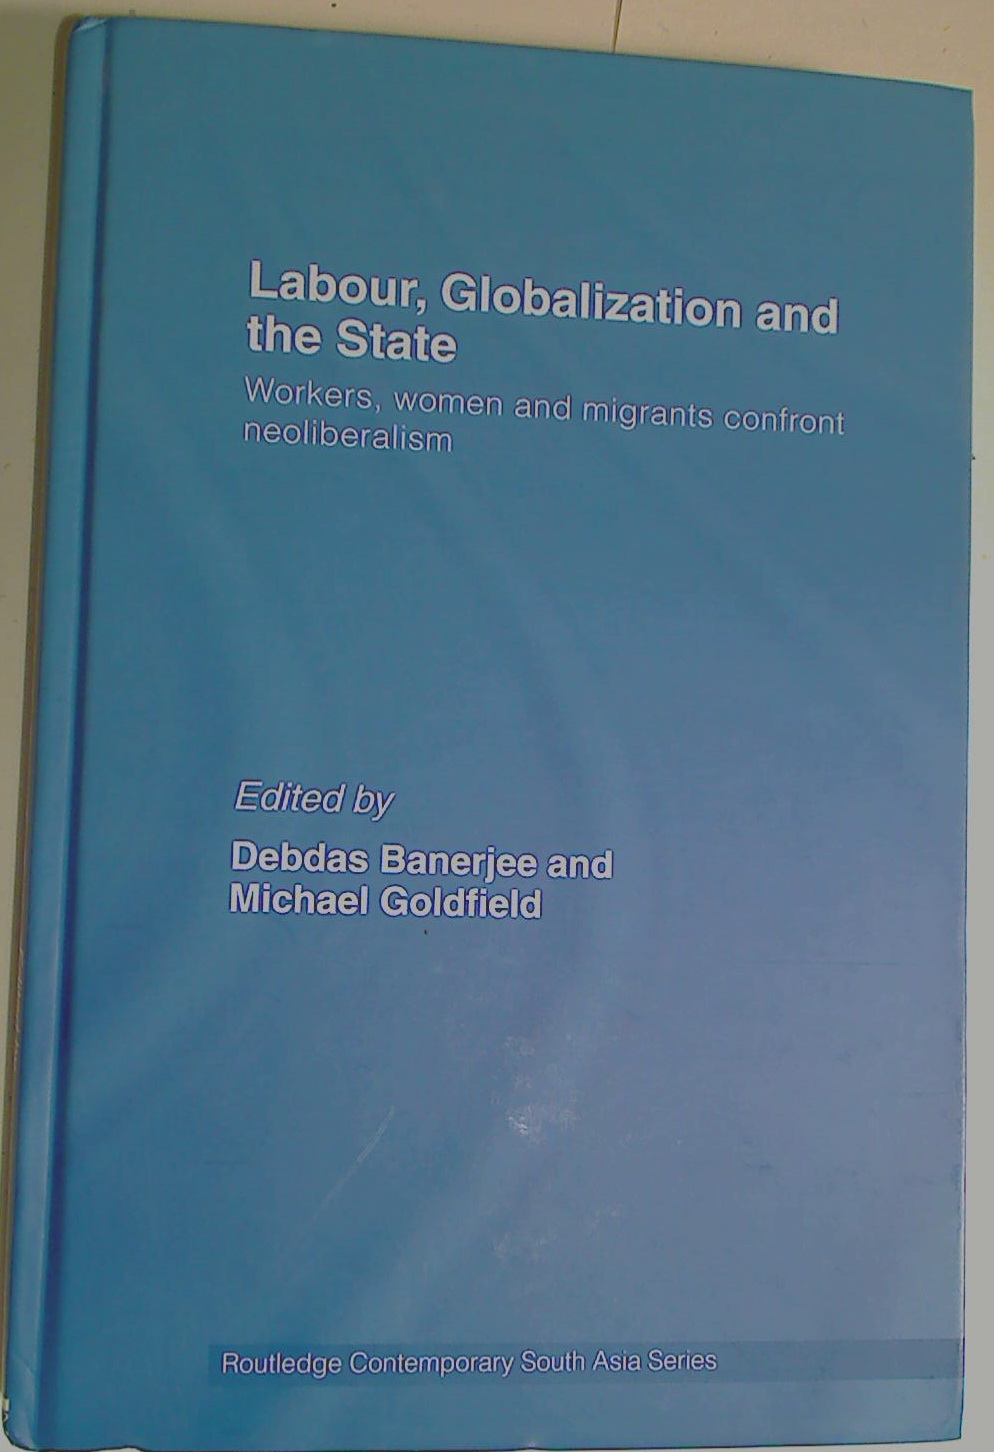 Labour, Globalization and the State: Workers, Women and Migrants Confront Neoliberalism.